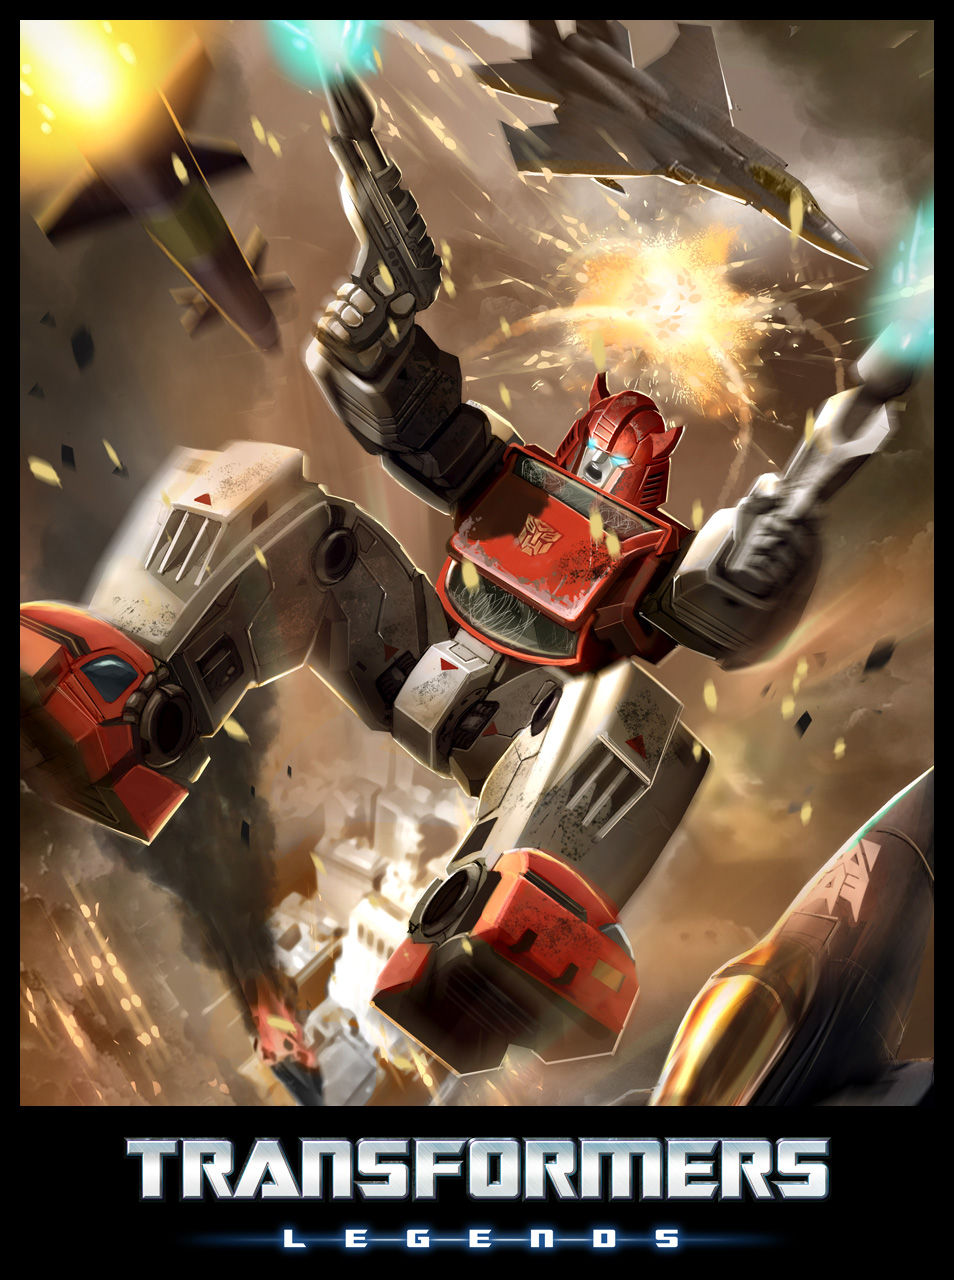 TRANSFORMERS: LEGENDS Free-to-Play Game launches for iPhone, iPad, iPod Touch + Android